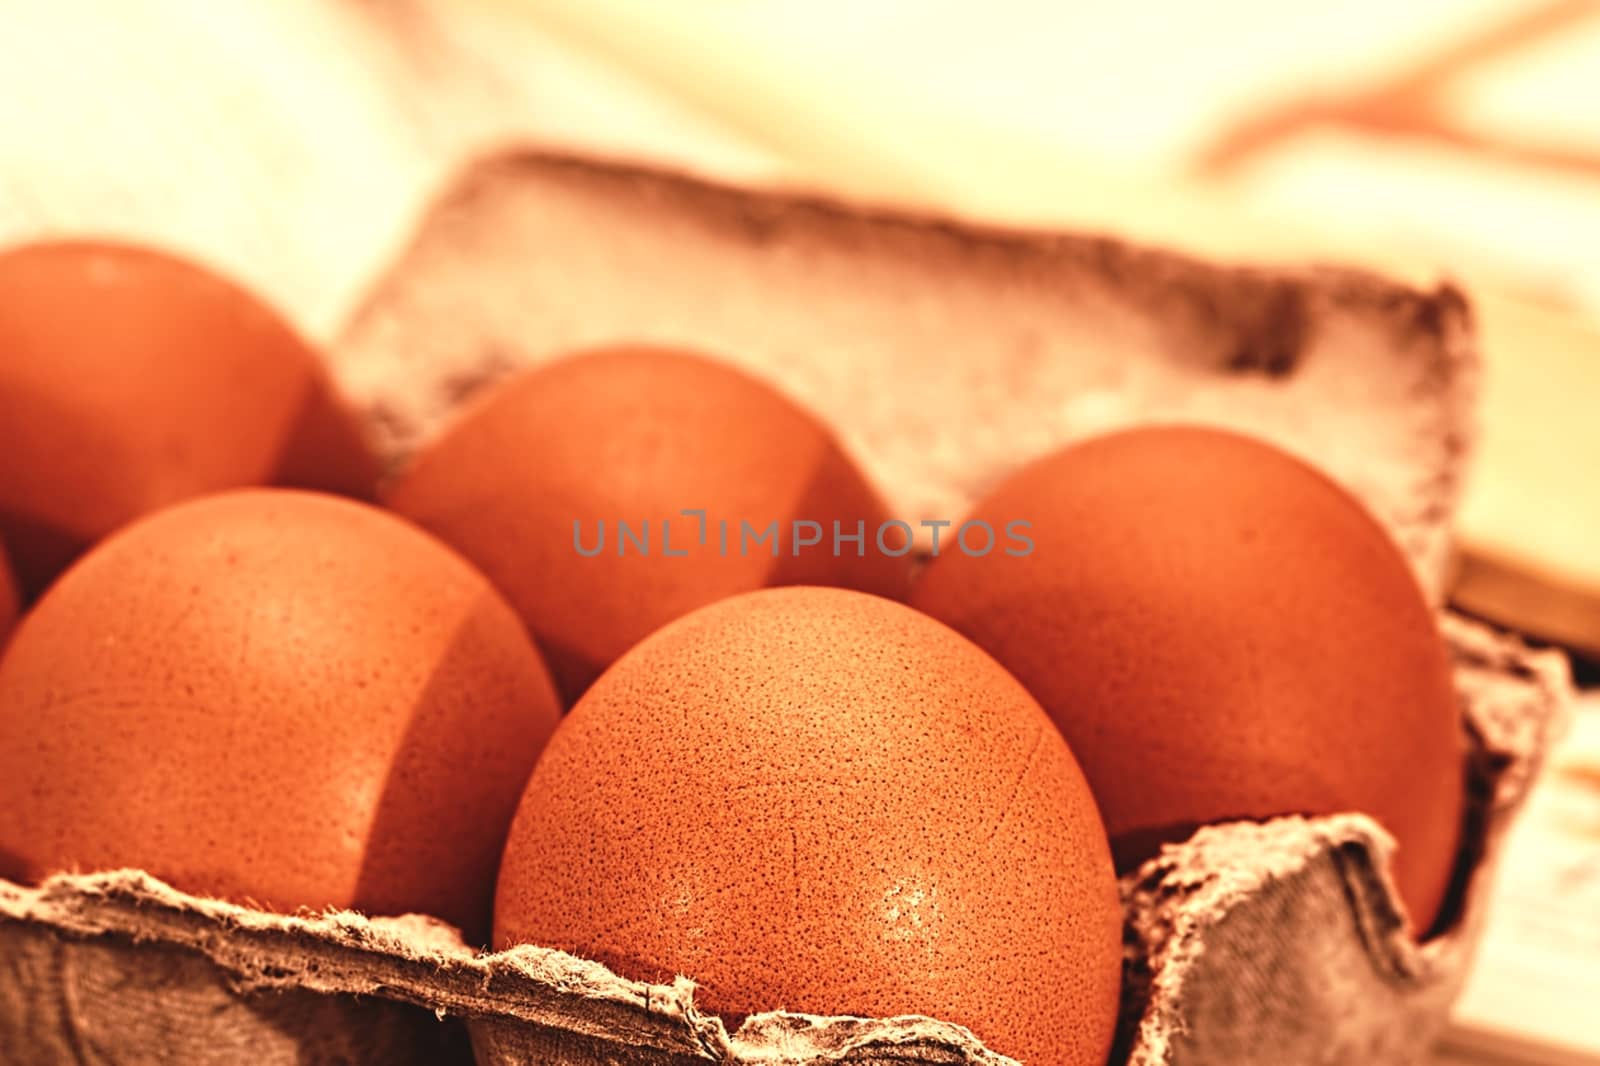 Five eggs in the egg box. High quality photo